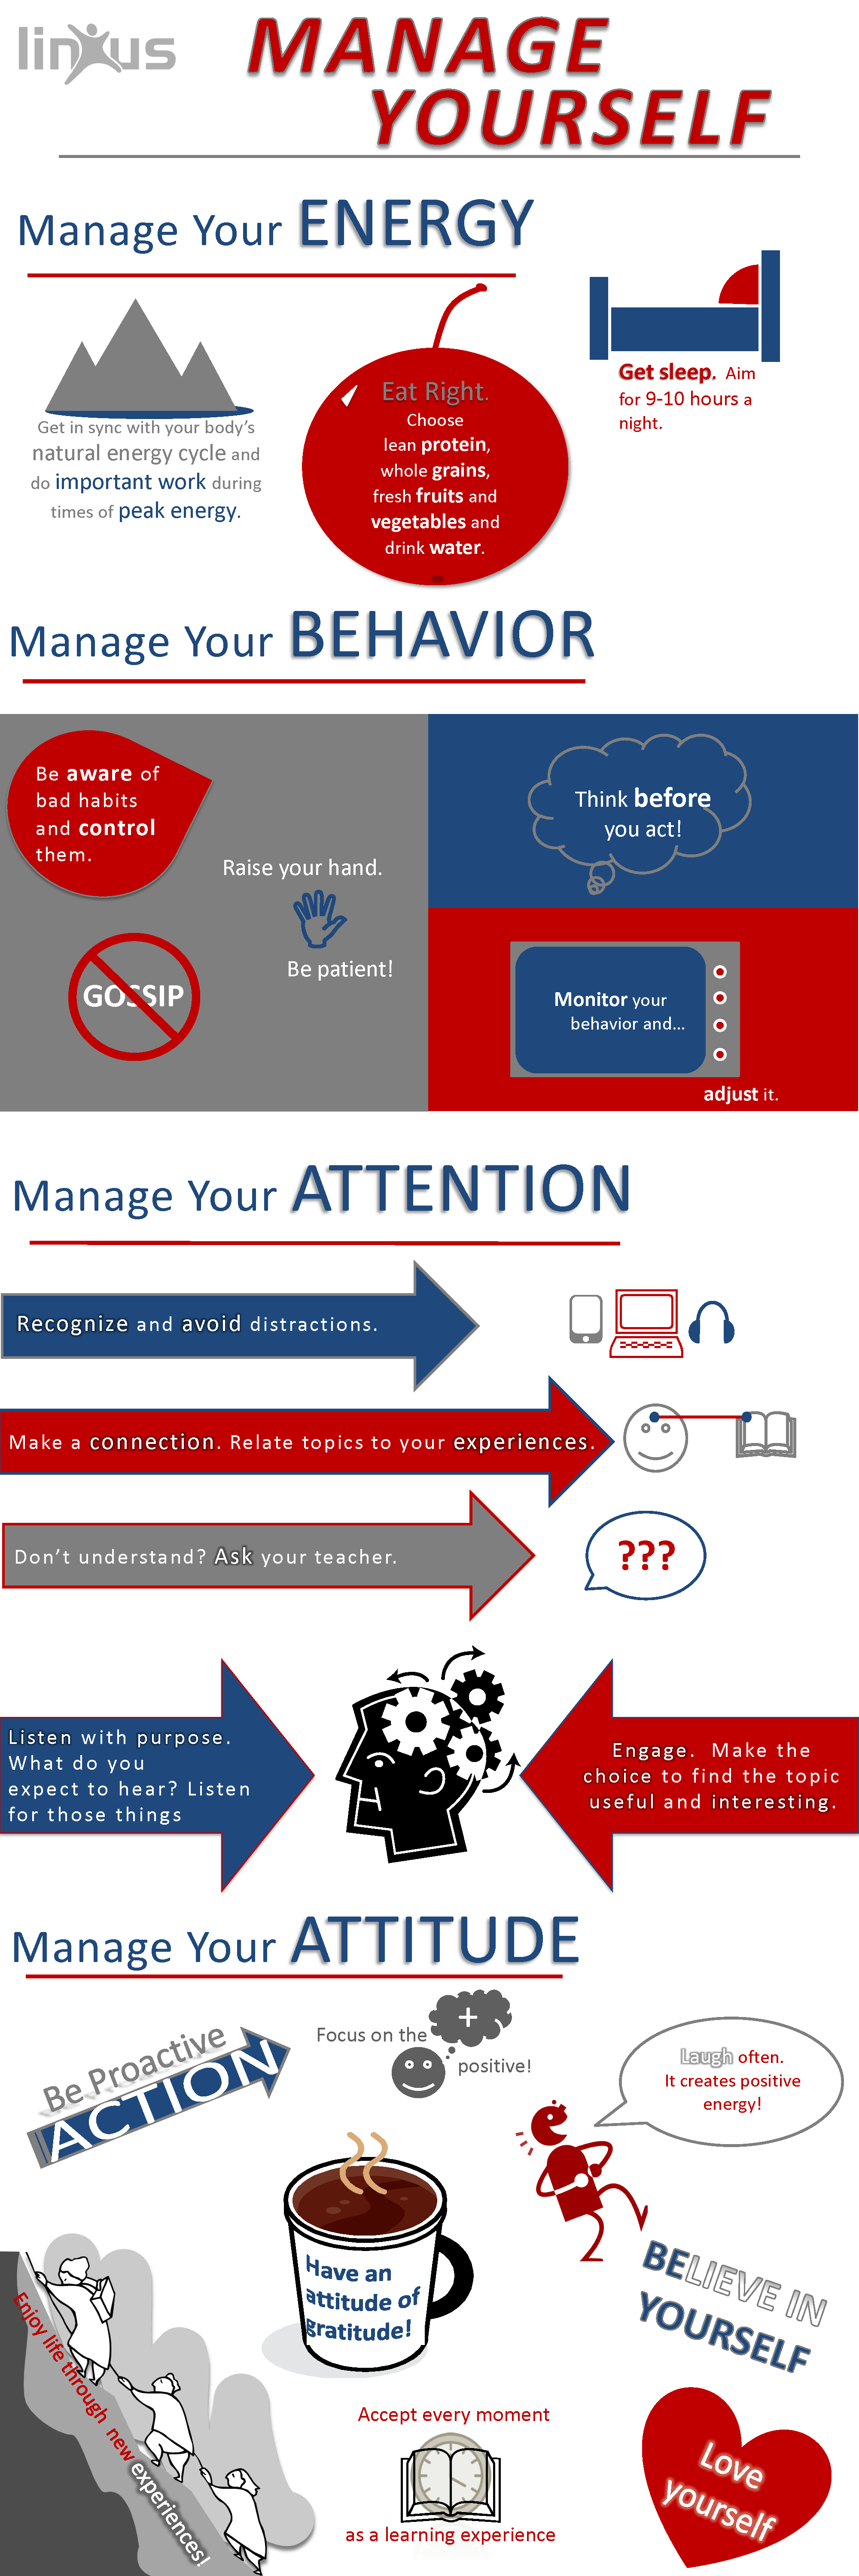 Manage Yourself_infographic